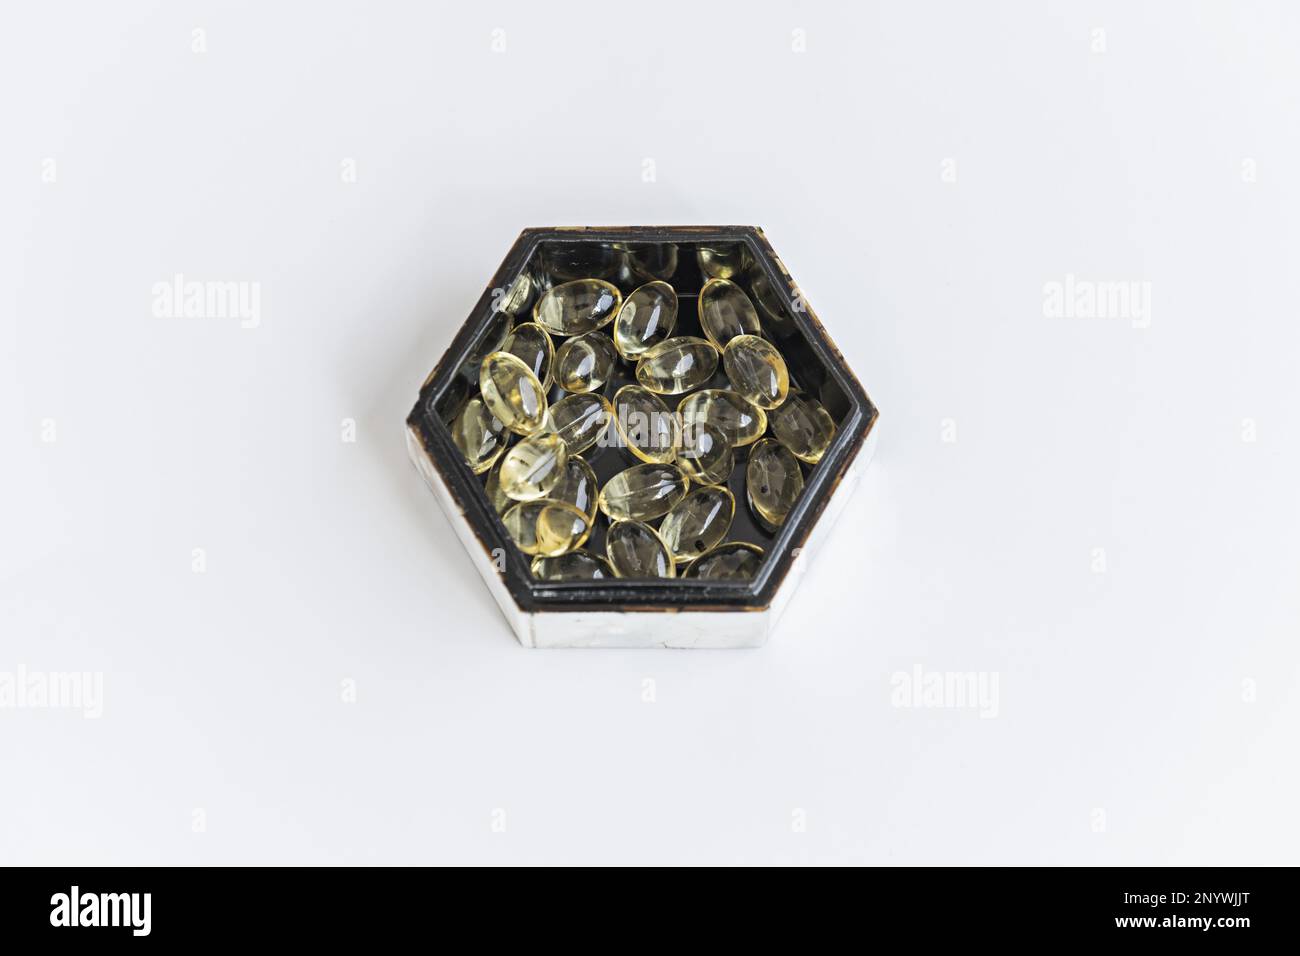 A hexagonal mother-of-pearl box with a black interior filled with pearls of a supreme liquid diet on a smooth white surface Stock Photo